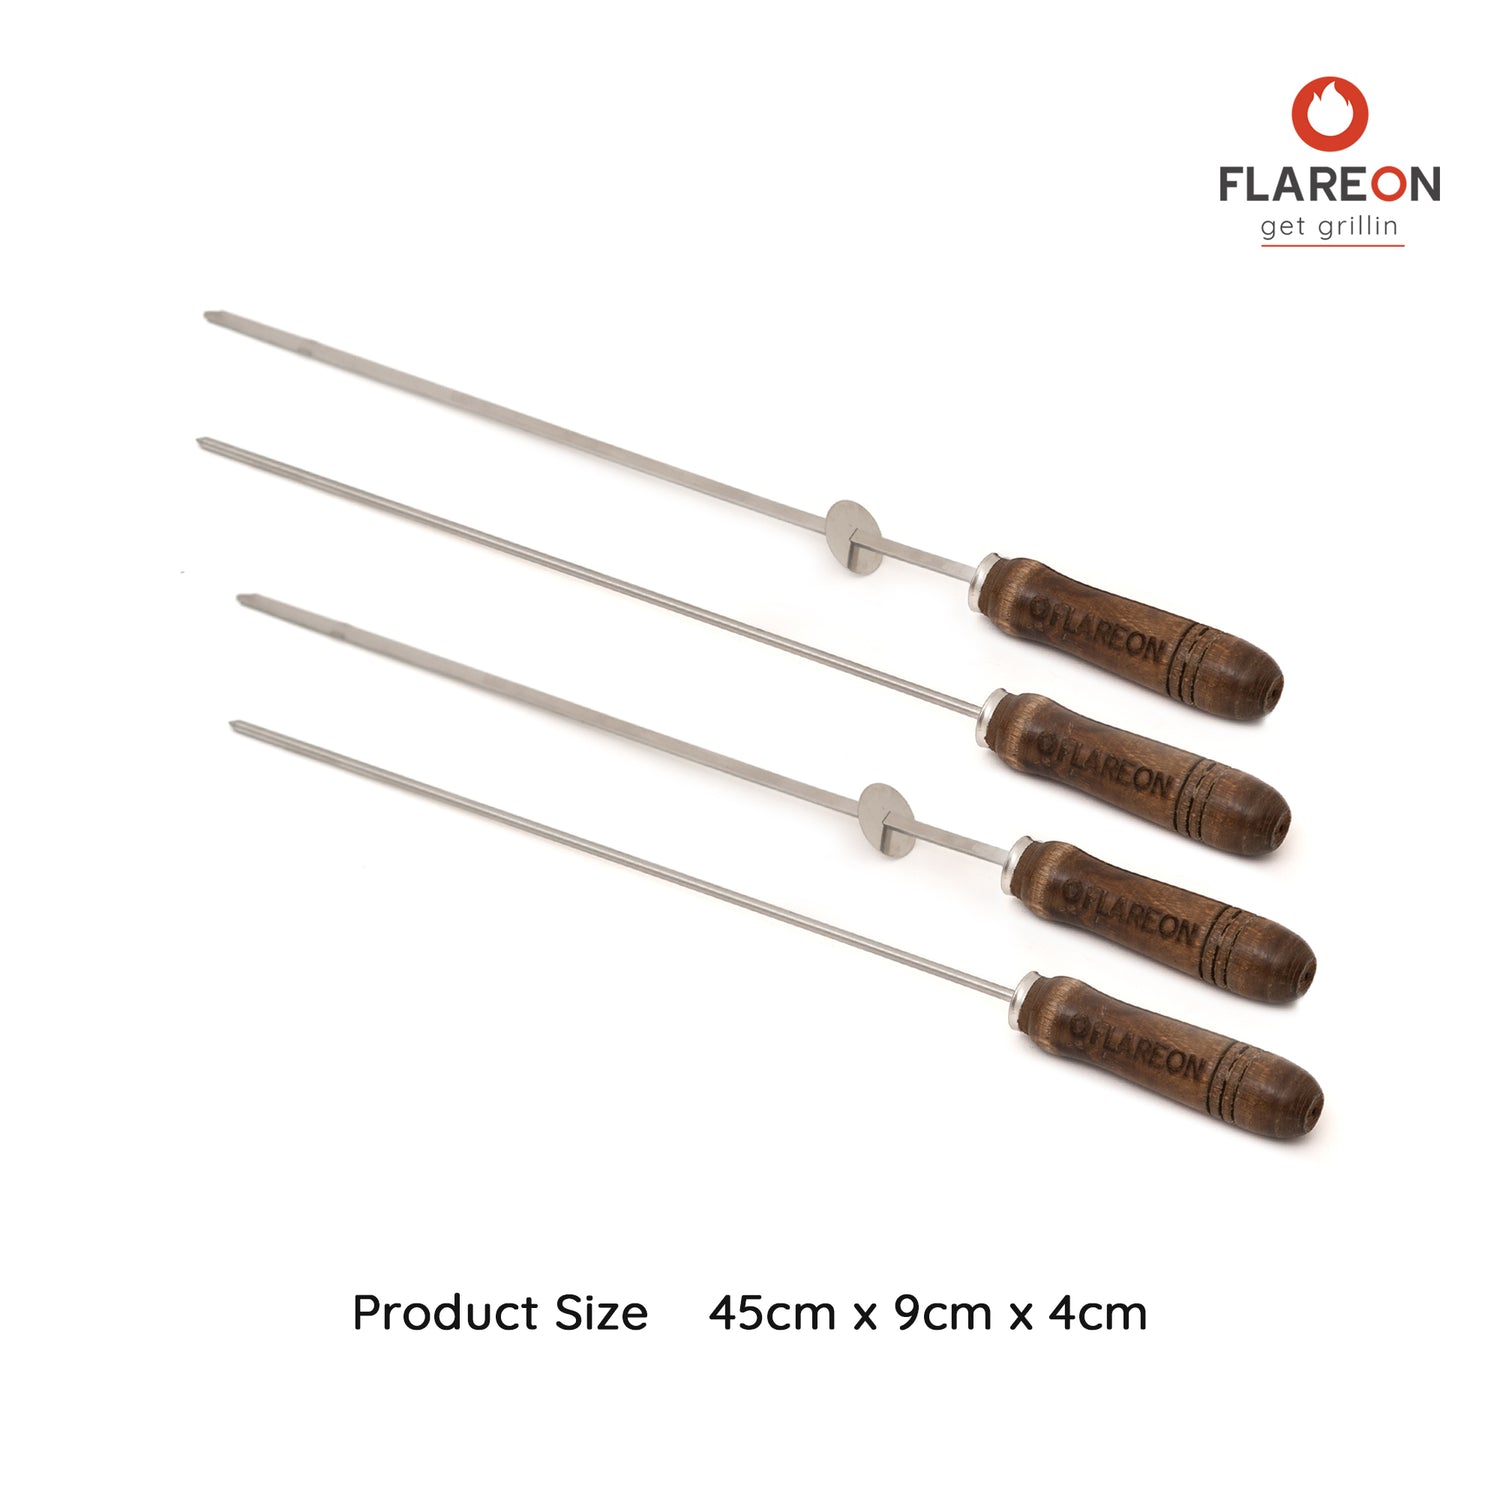 FlareOn's Flat and Fat BBQ Spears- Product Size